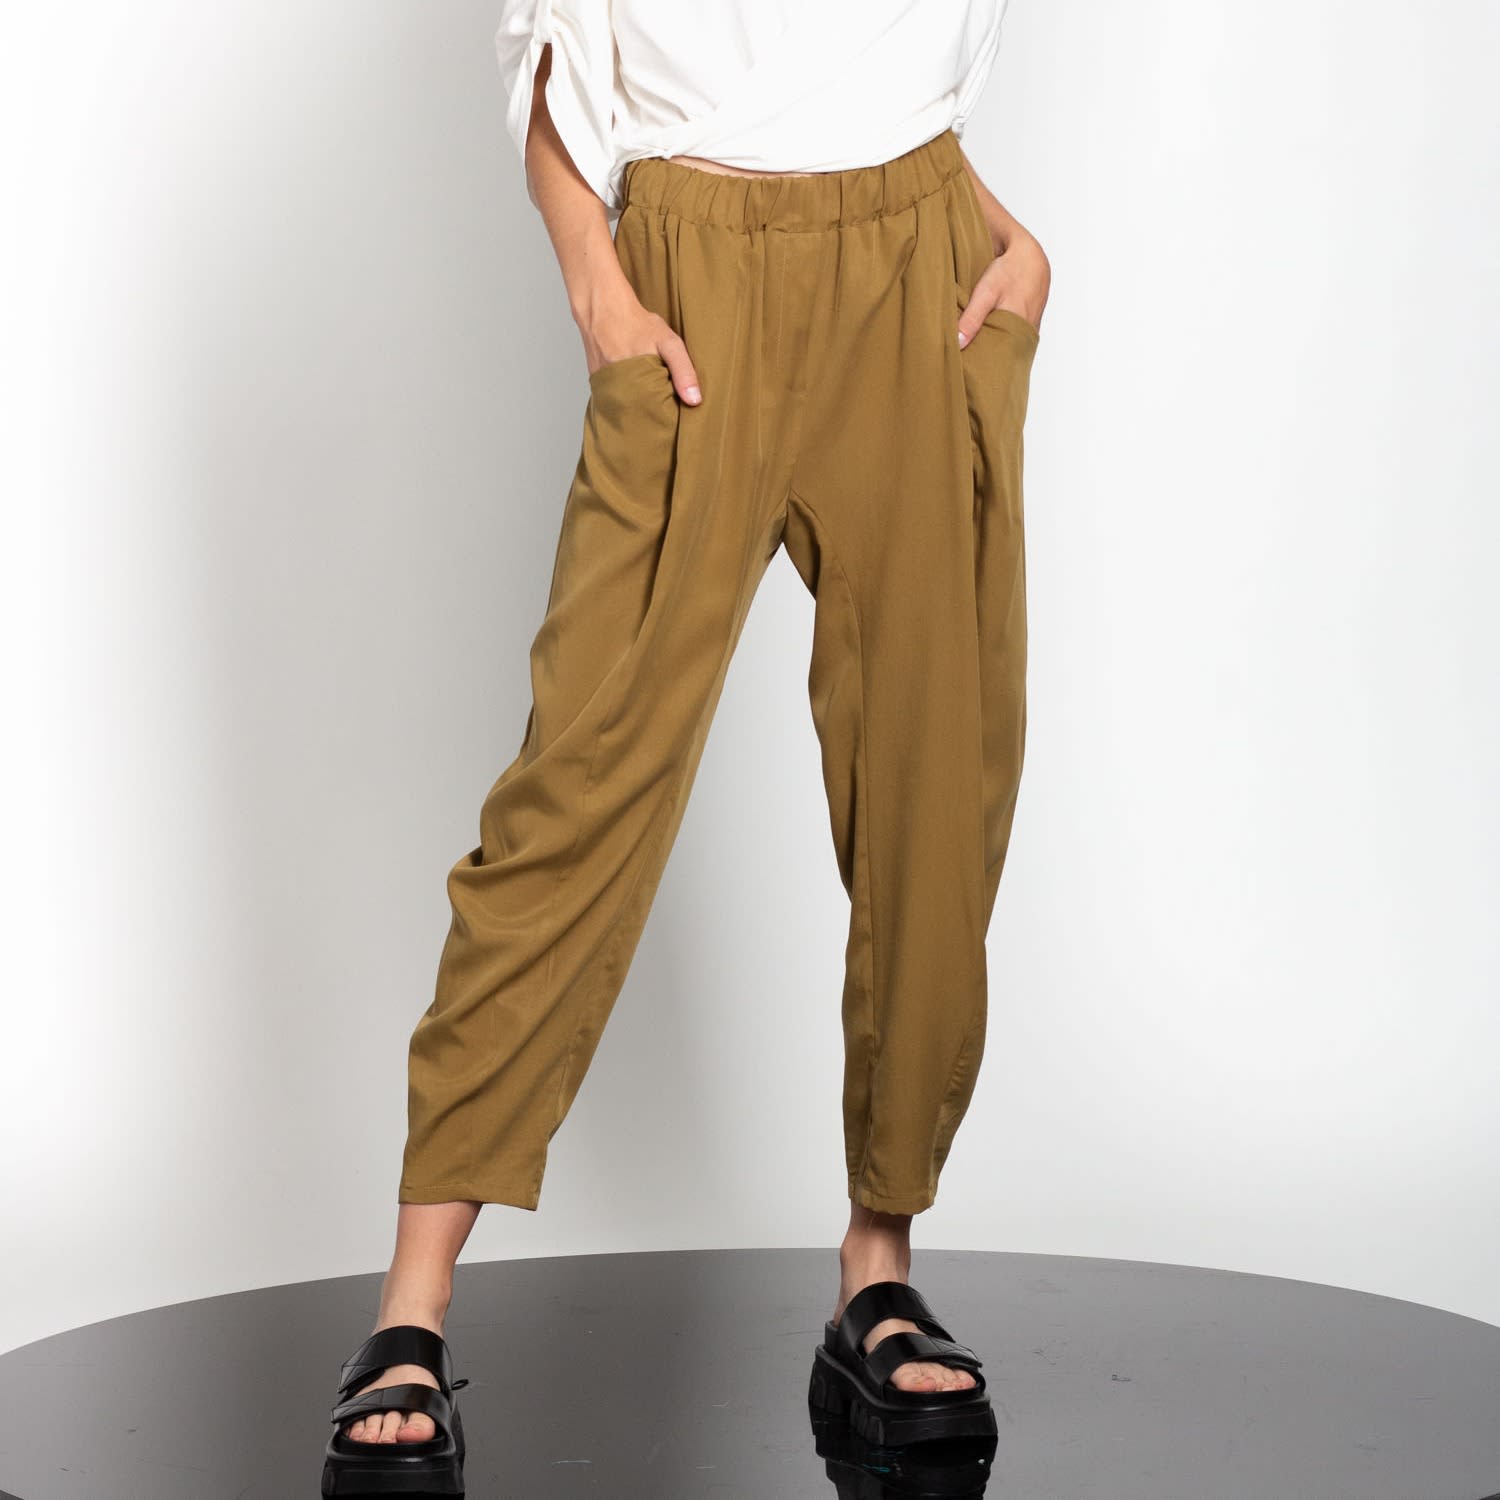 fvwitlyh Pants for Women Peg Pants with Tie Trousers Stitching